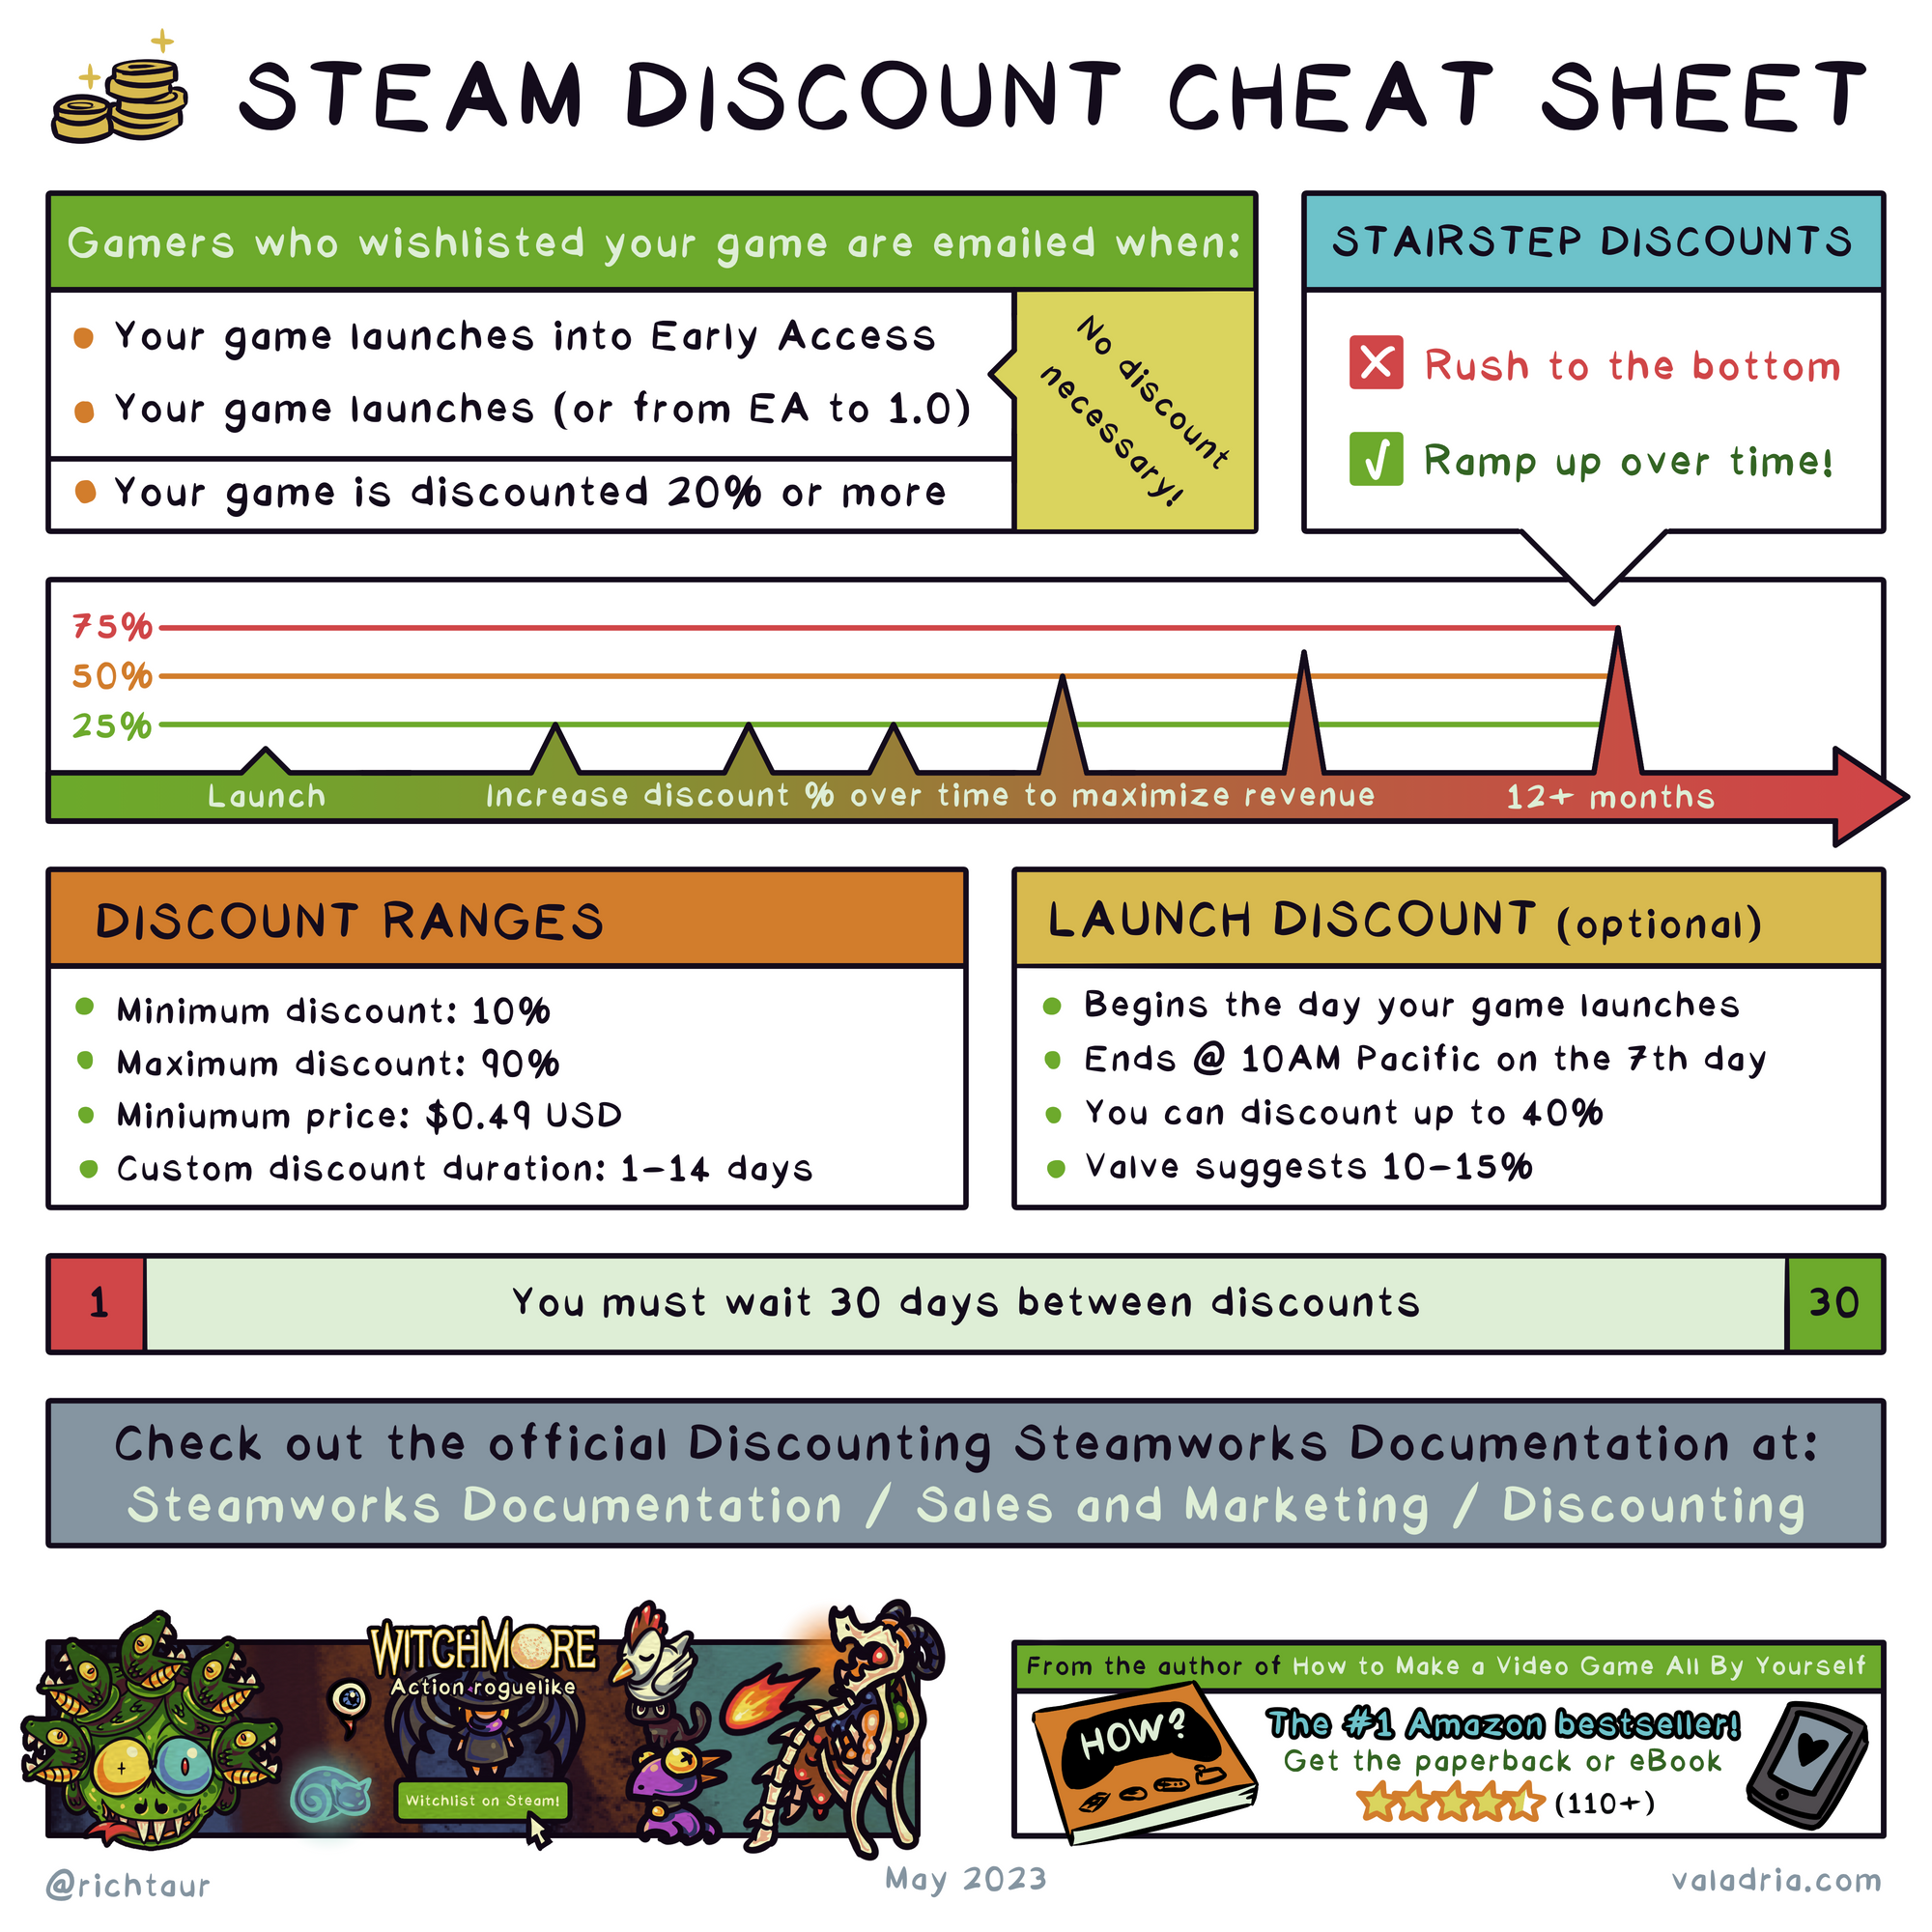 STEAM DISCOUNT CHEAT SHEET Gamers who wishlisted your game are emailed when: Your game launches into Early Access Your game launches (or from EA to 1.0) Your game is discounted 20% or more STAIRSTEP DISCOUNTS Don't rush to the bottom. Do ramp up over time! DISCOUNT RANGES Minimum discount: 10% Maximum discount: 90% Minimum price: $0.49 USD Custom discount duration: 1-14 days LAUNCH DISCOUNT (optional) Begins the day your game launches Ends @ 10 AM Pacific on the 7th day You can discount up to 40% Valve suggests 10-15% You must wait 30 days between discounts Check out the official Discounting Steamworks Documentation at: Steamworks Documentation / Sales and Marketing / Discounting From the author of How to Make a Video Game All By Yourself @richtaur May 2023 valadria.com